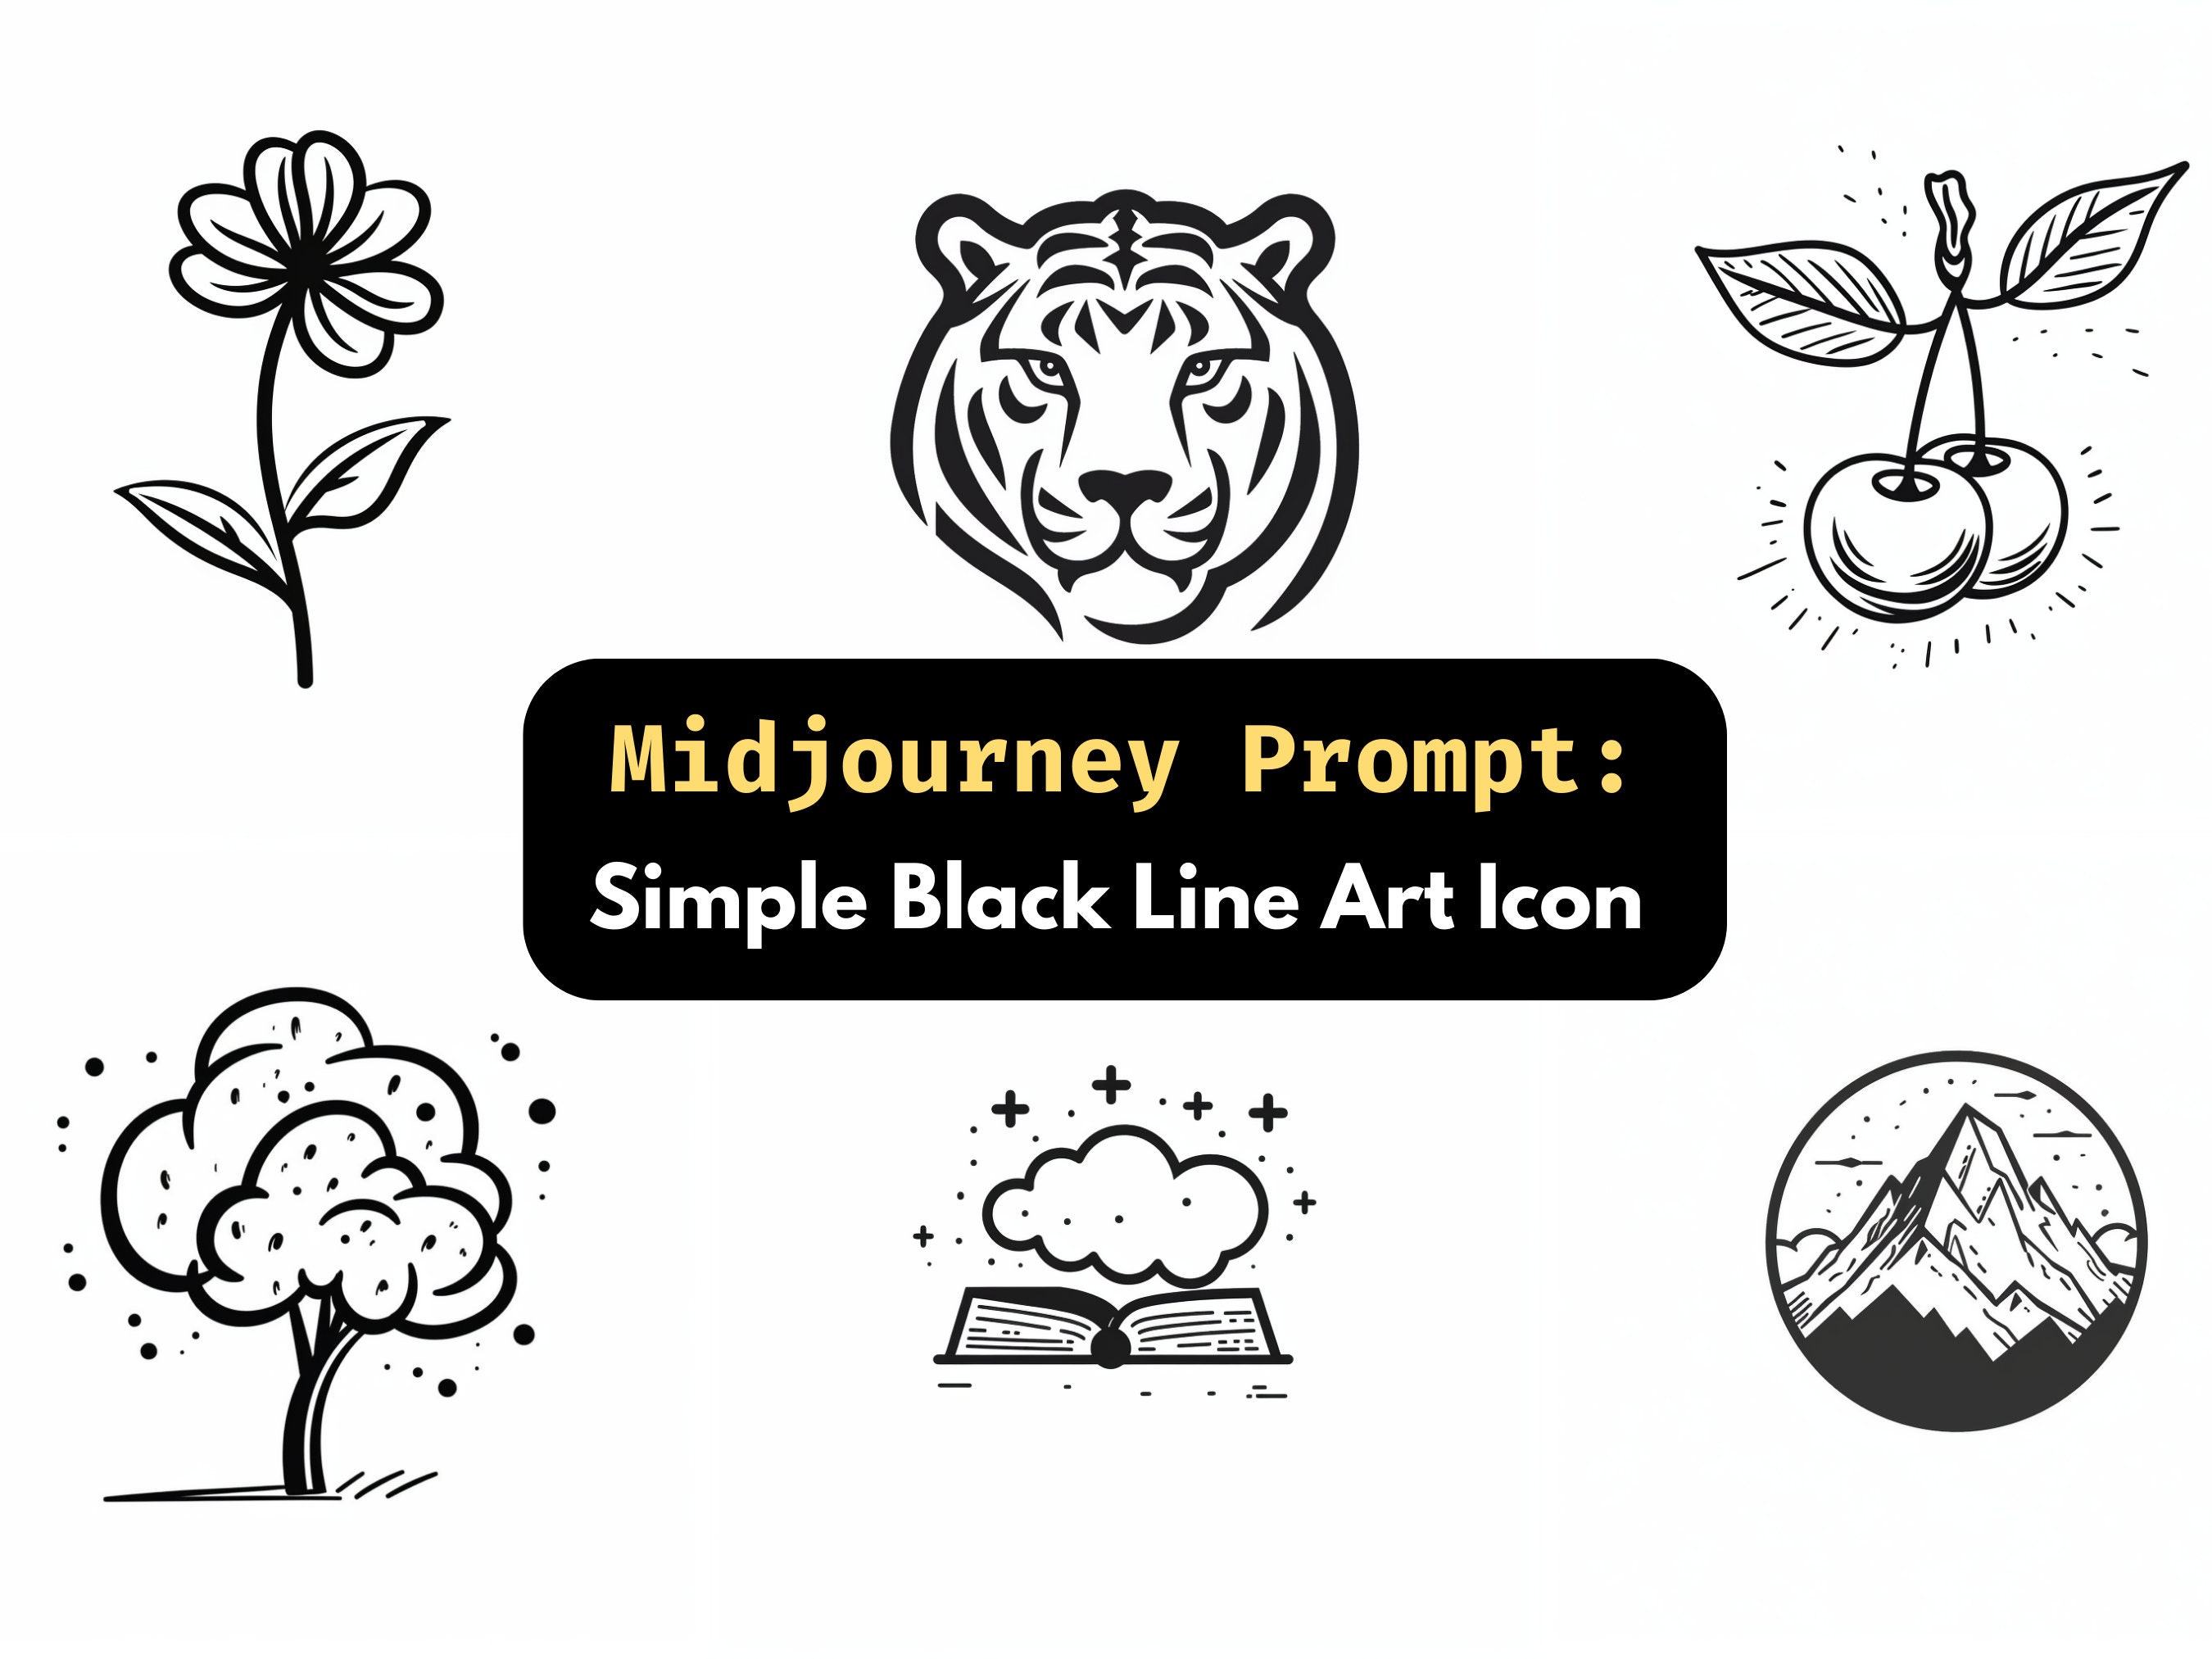 I used MidJourney, Photoshop, and printable temporary tattoo paper